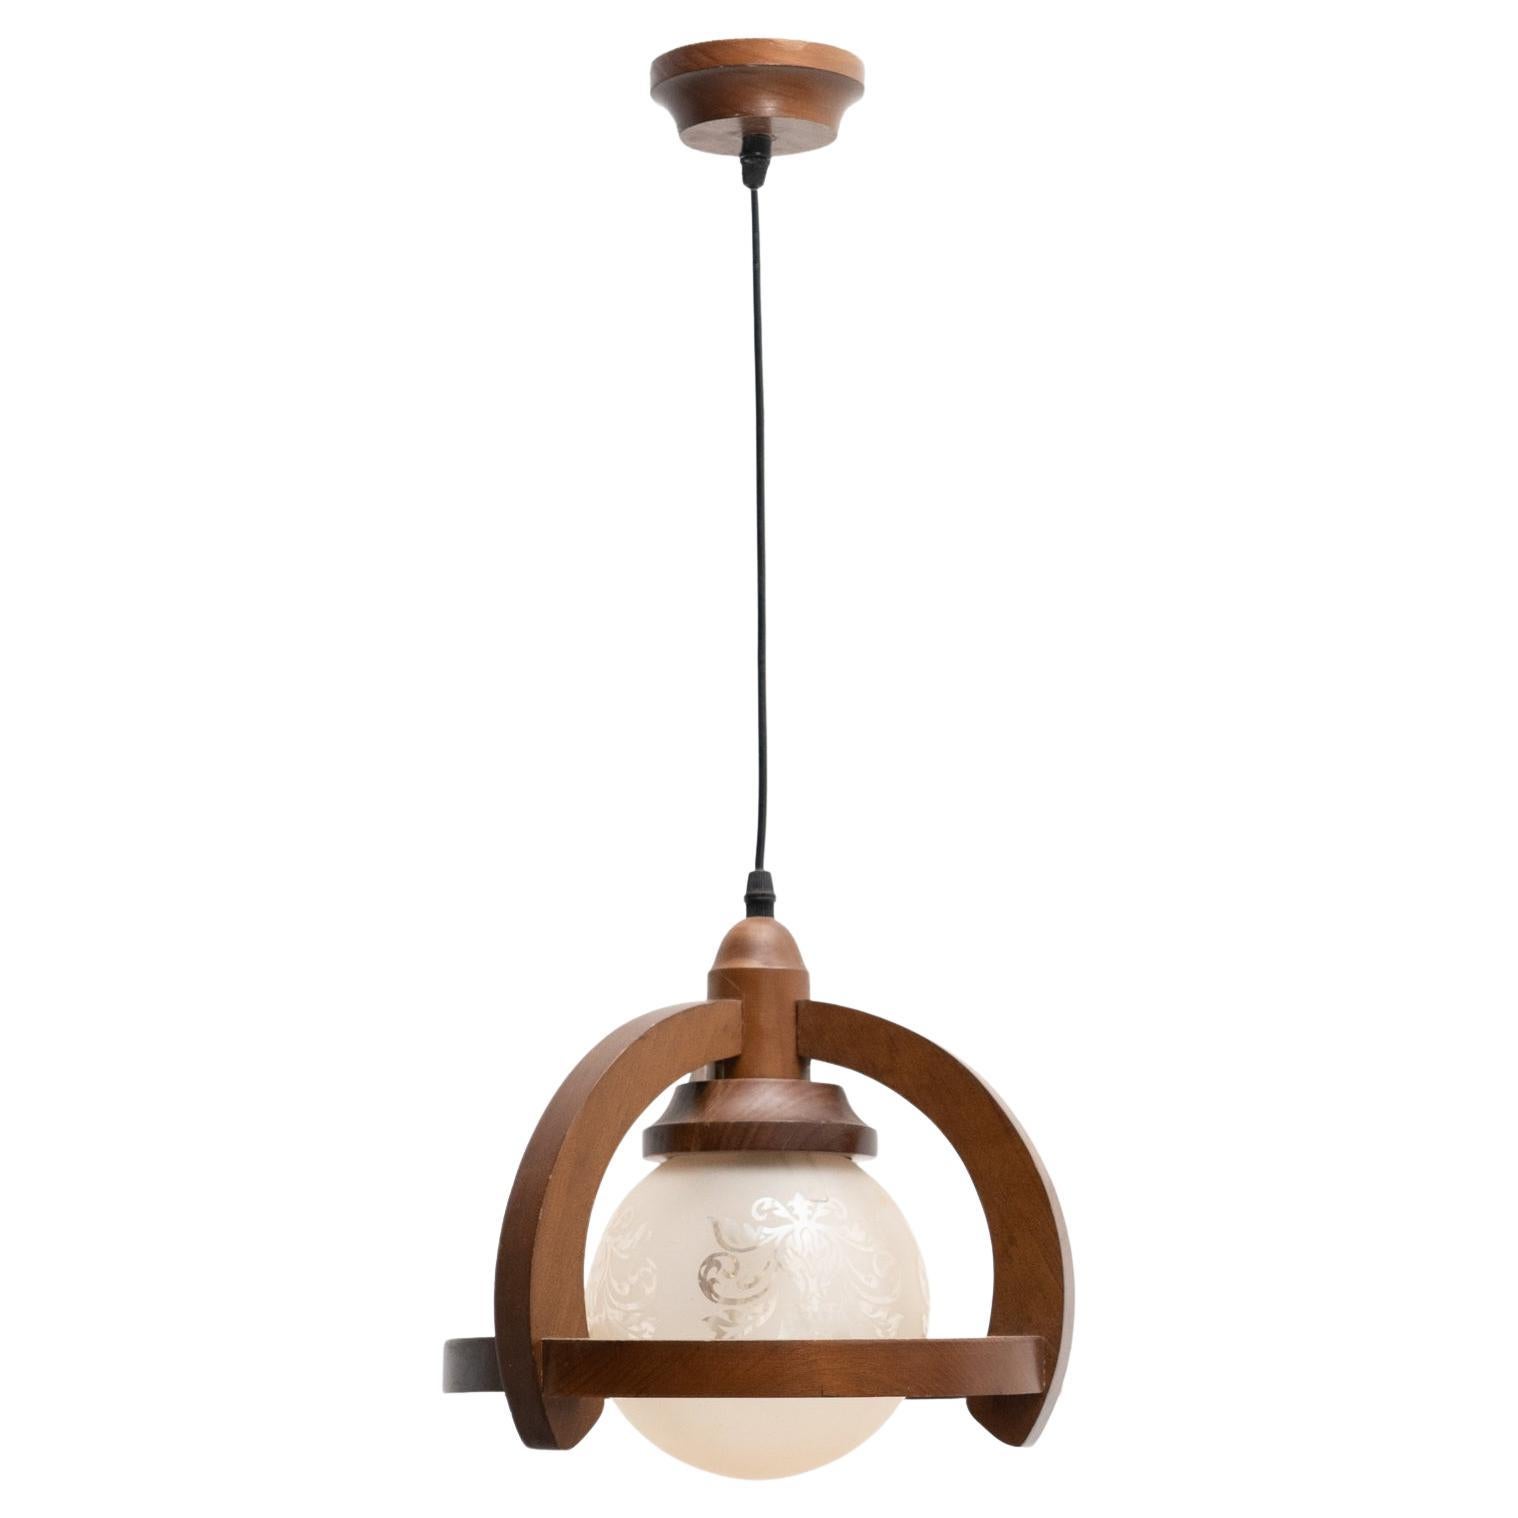 Vintage French Wood and White Glass Ceiling Lamp, circa 1960